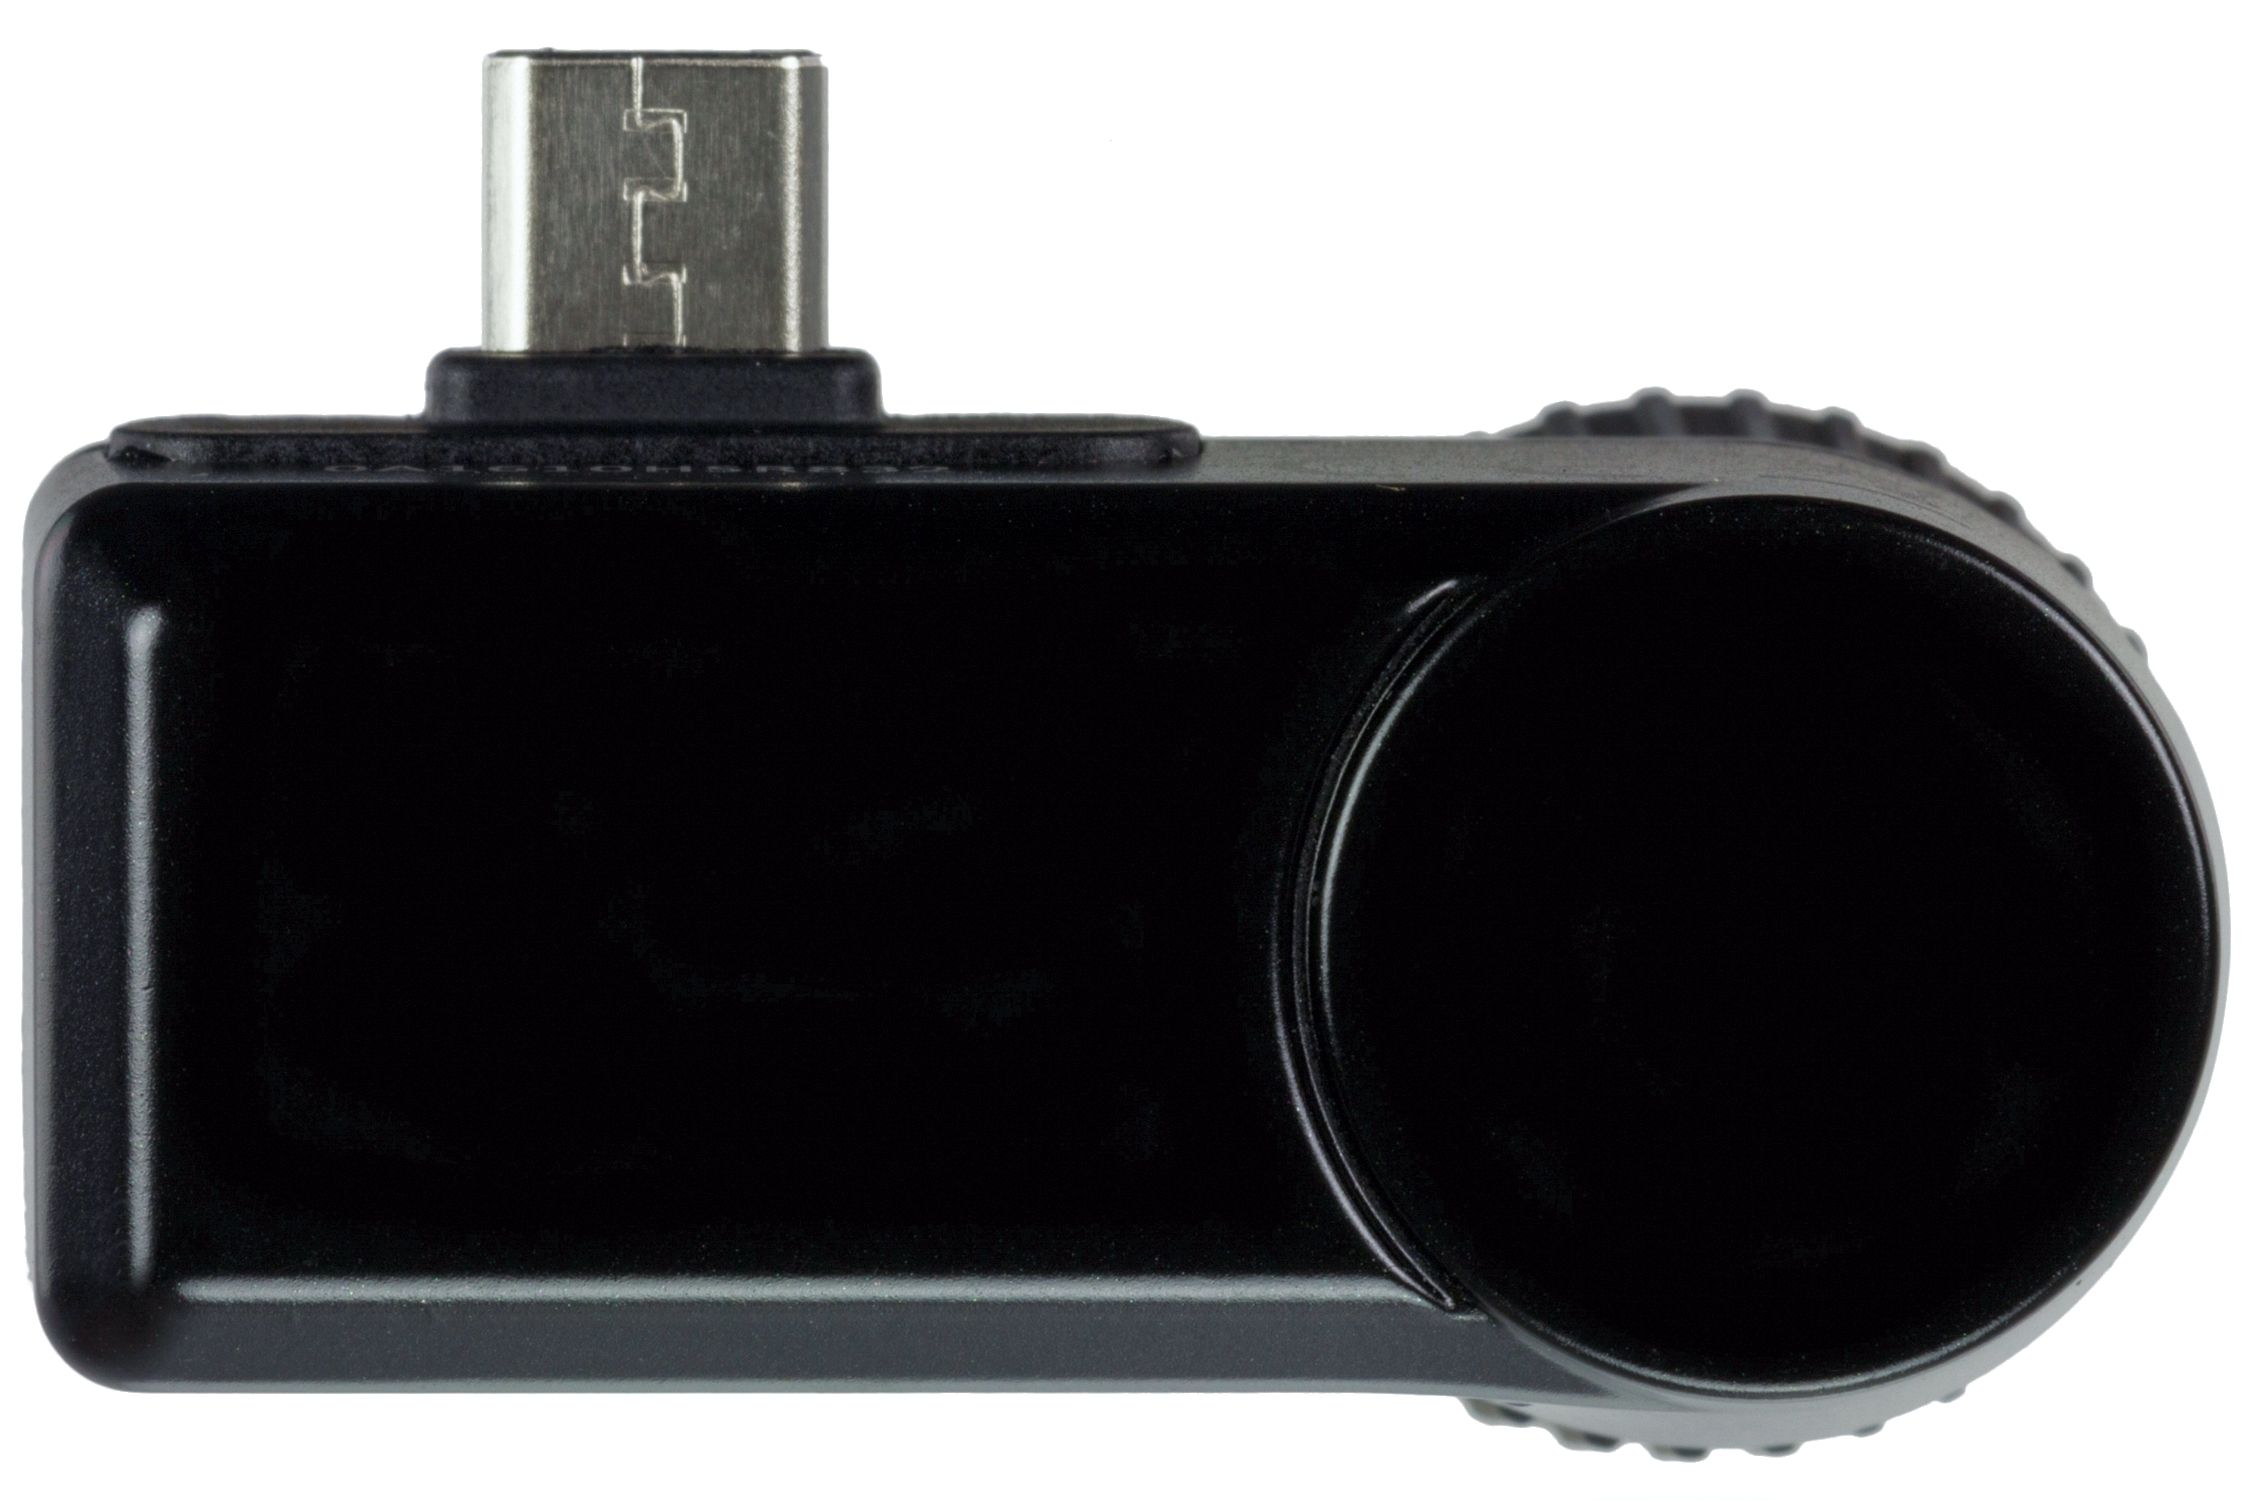 Seek Thermal Compact Android micro USB Thermal imaging camera UW-EAA_2